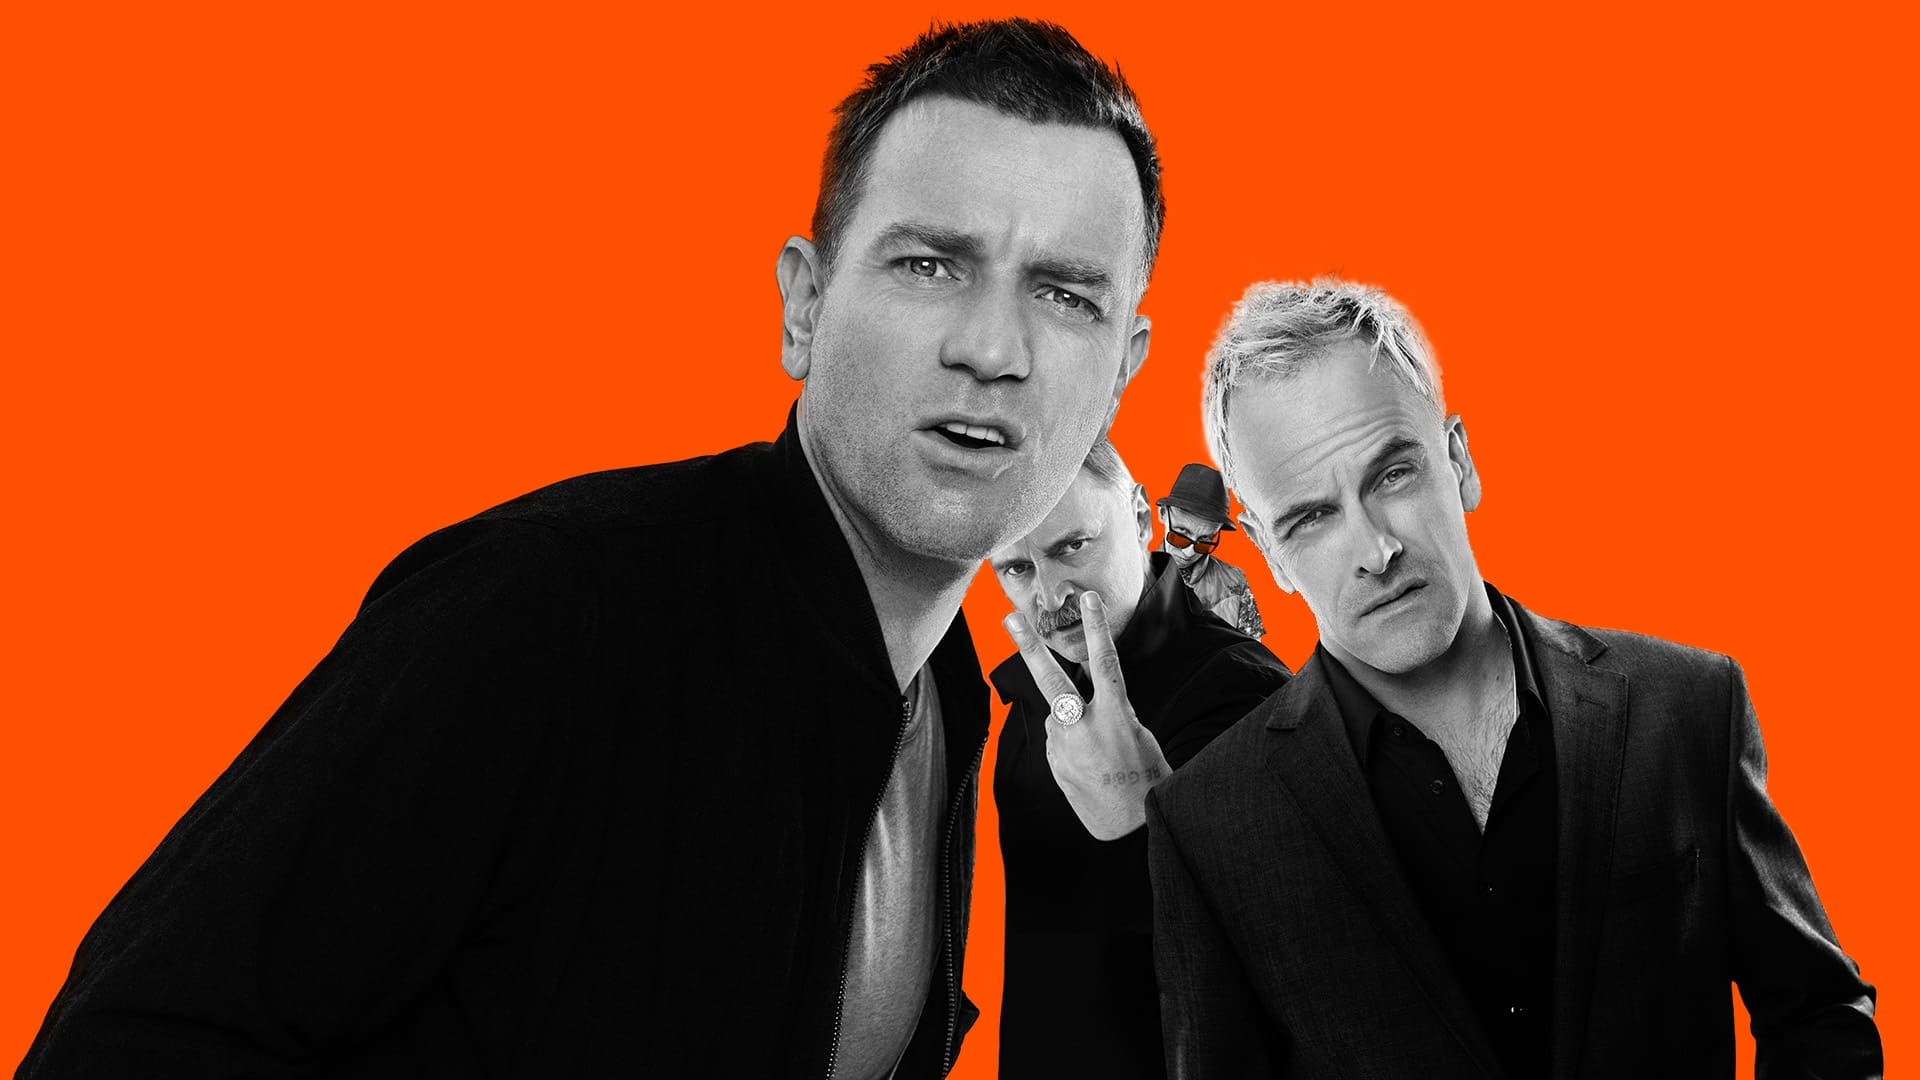 Watch T2 Trainspotting 123Movies